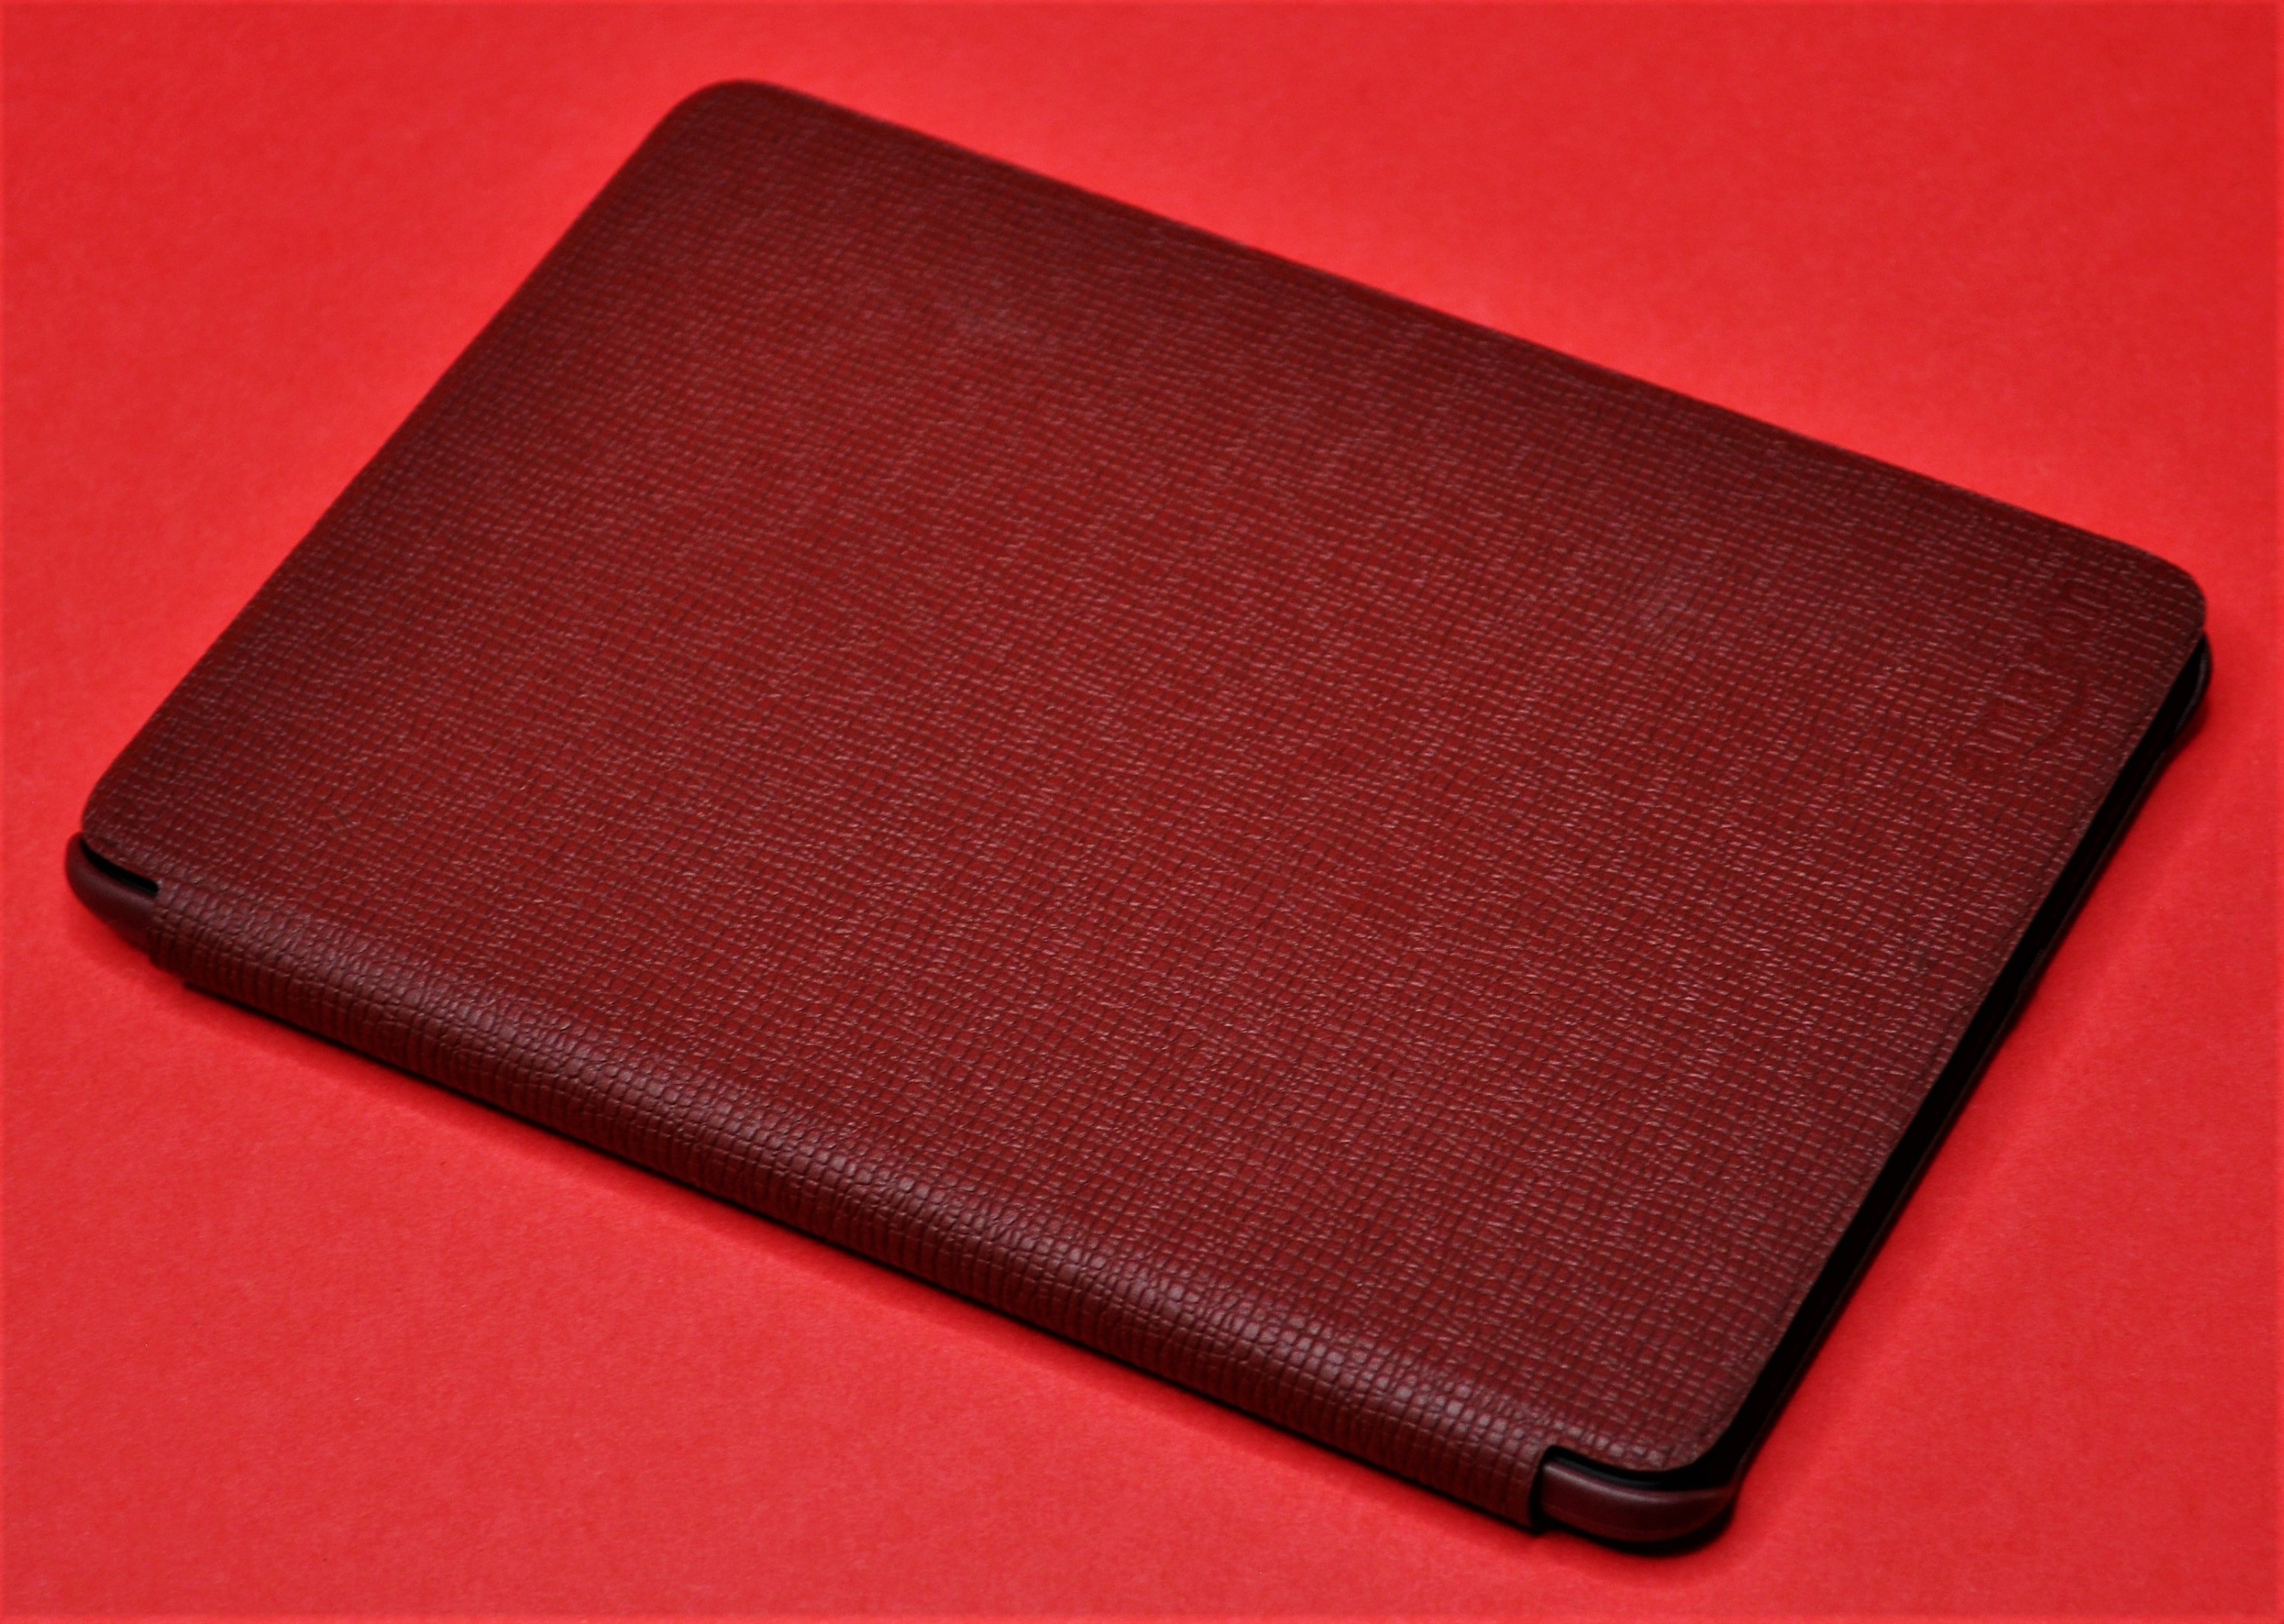 Waterproof Kindle Paperwhite Red Leather Cover